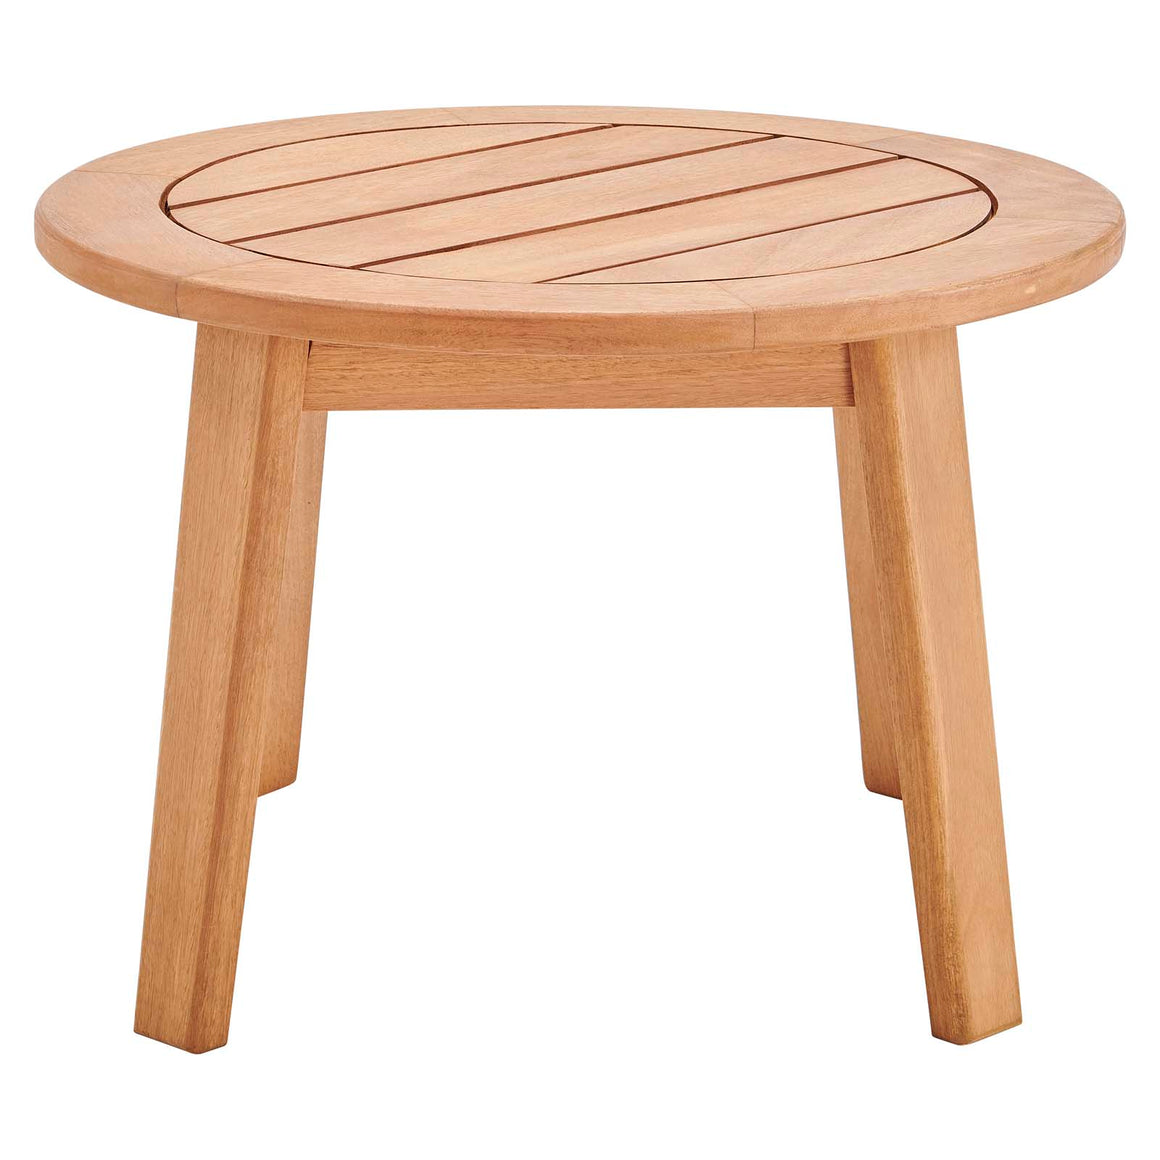 Vero Ash Wood Outdoor Patio Side End Table Natural